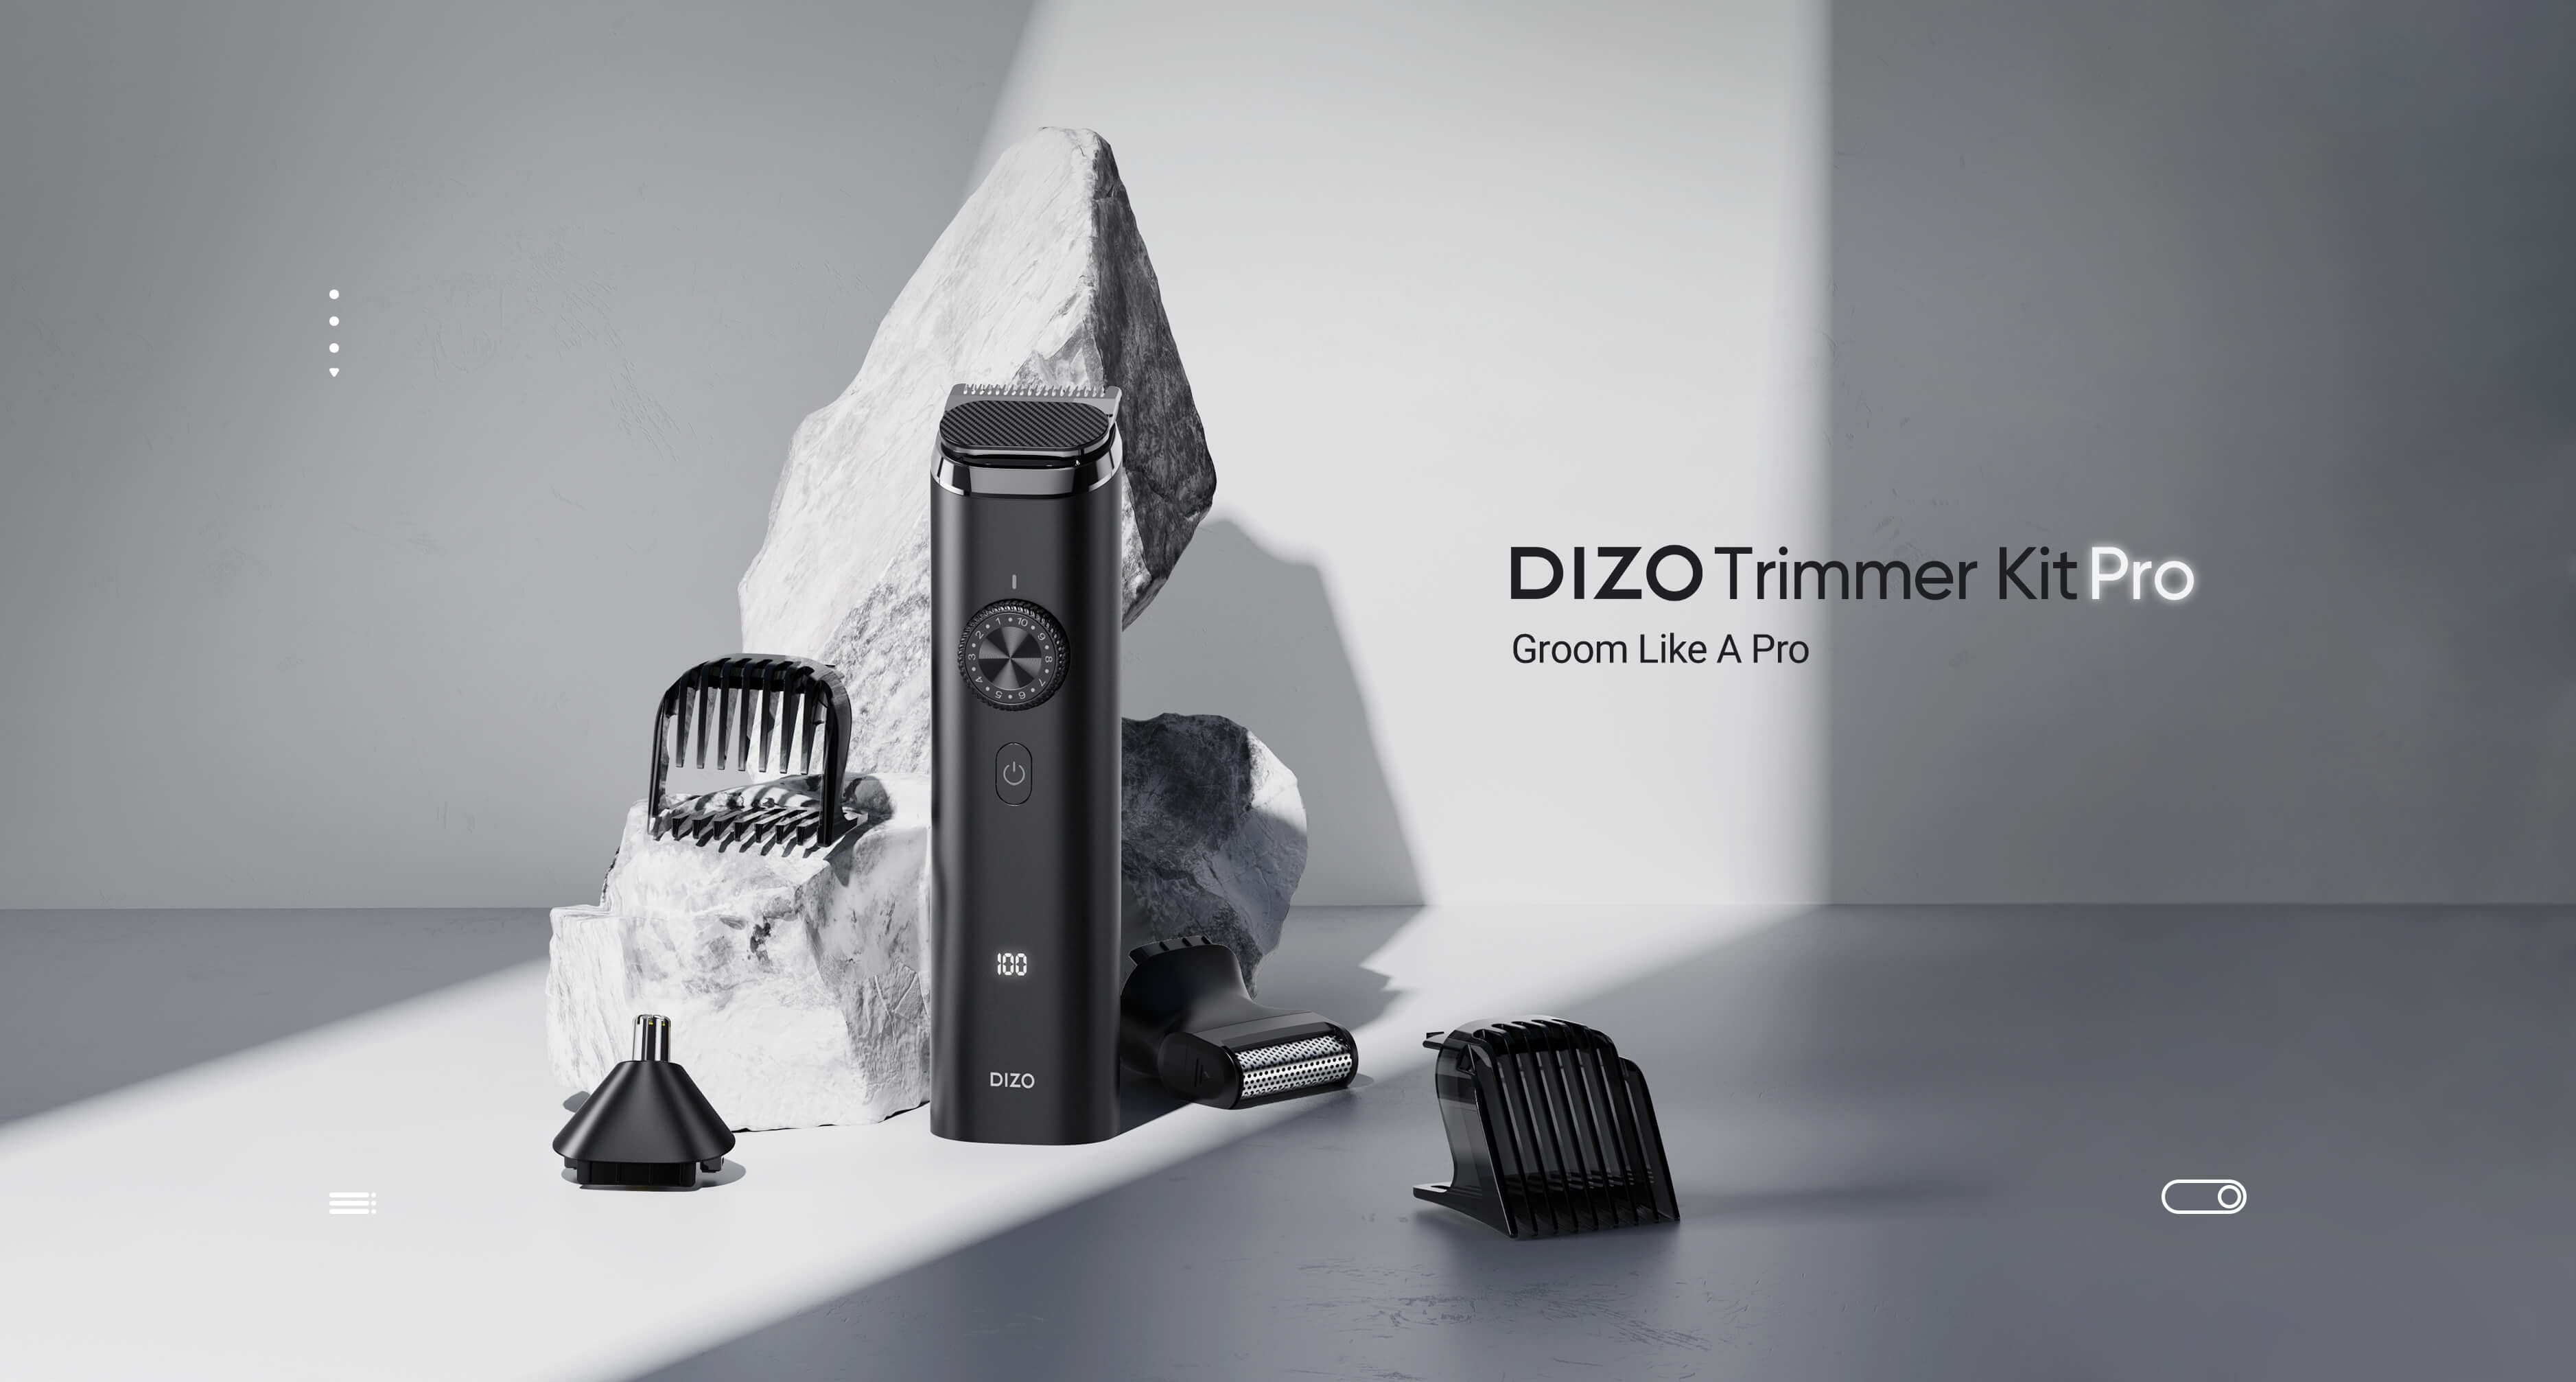 DIZO, launches DIZO Trimmer Kit Pro; 5-in-1 grooming kit with shaver and 3.5 months of use